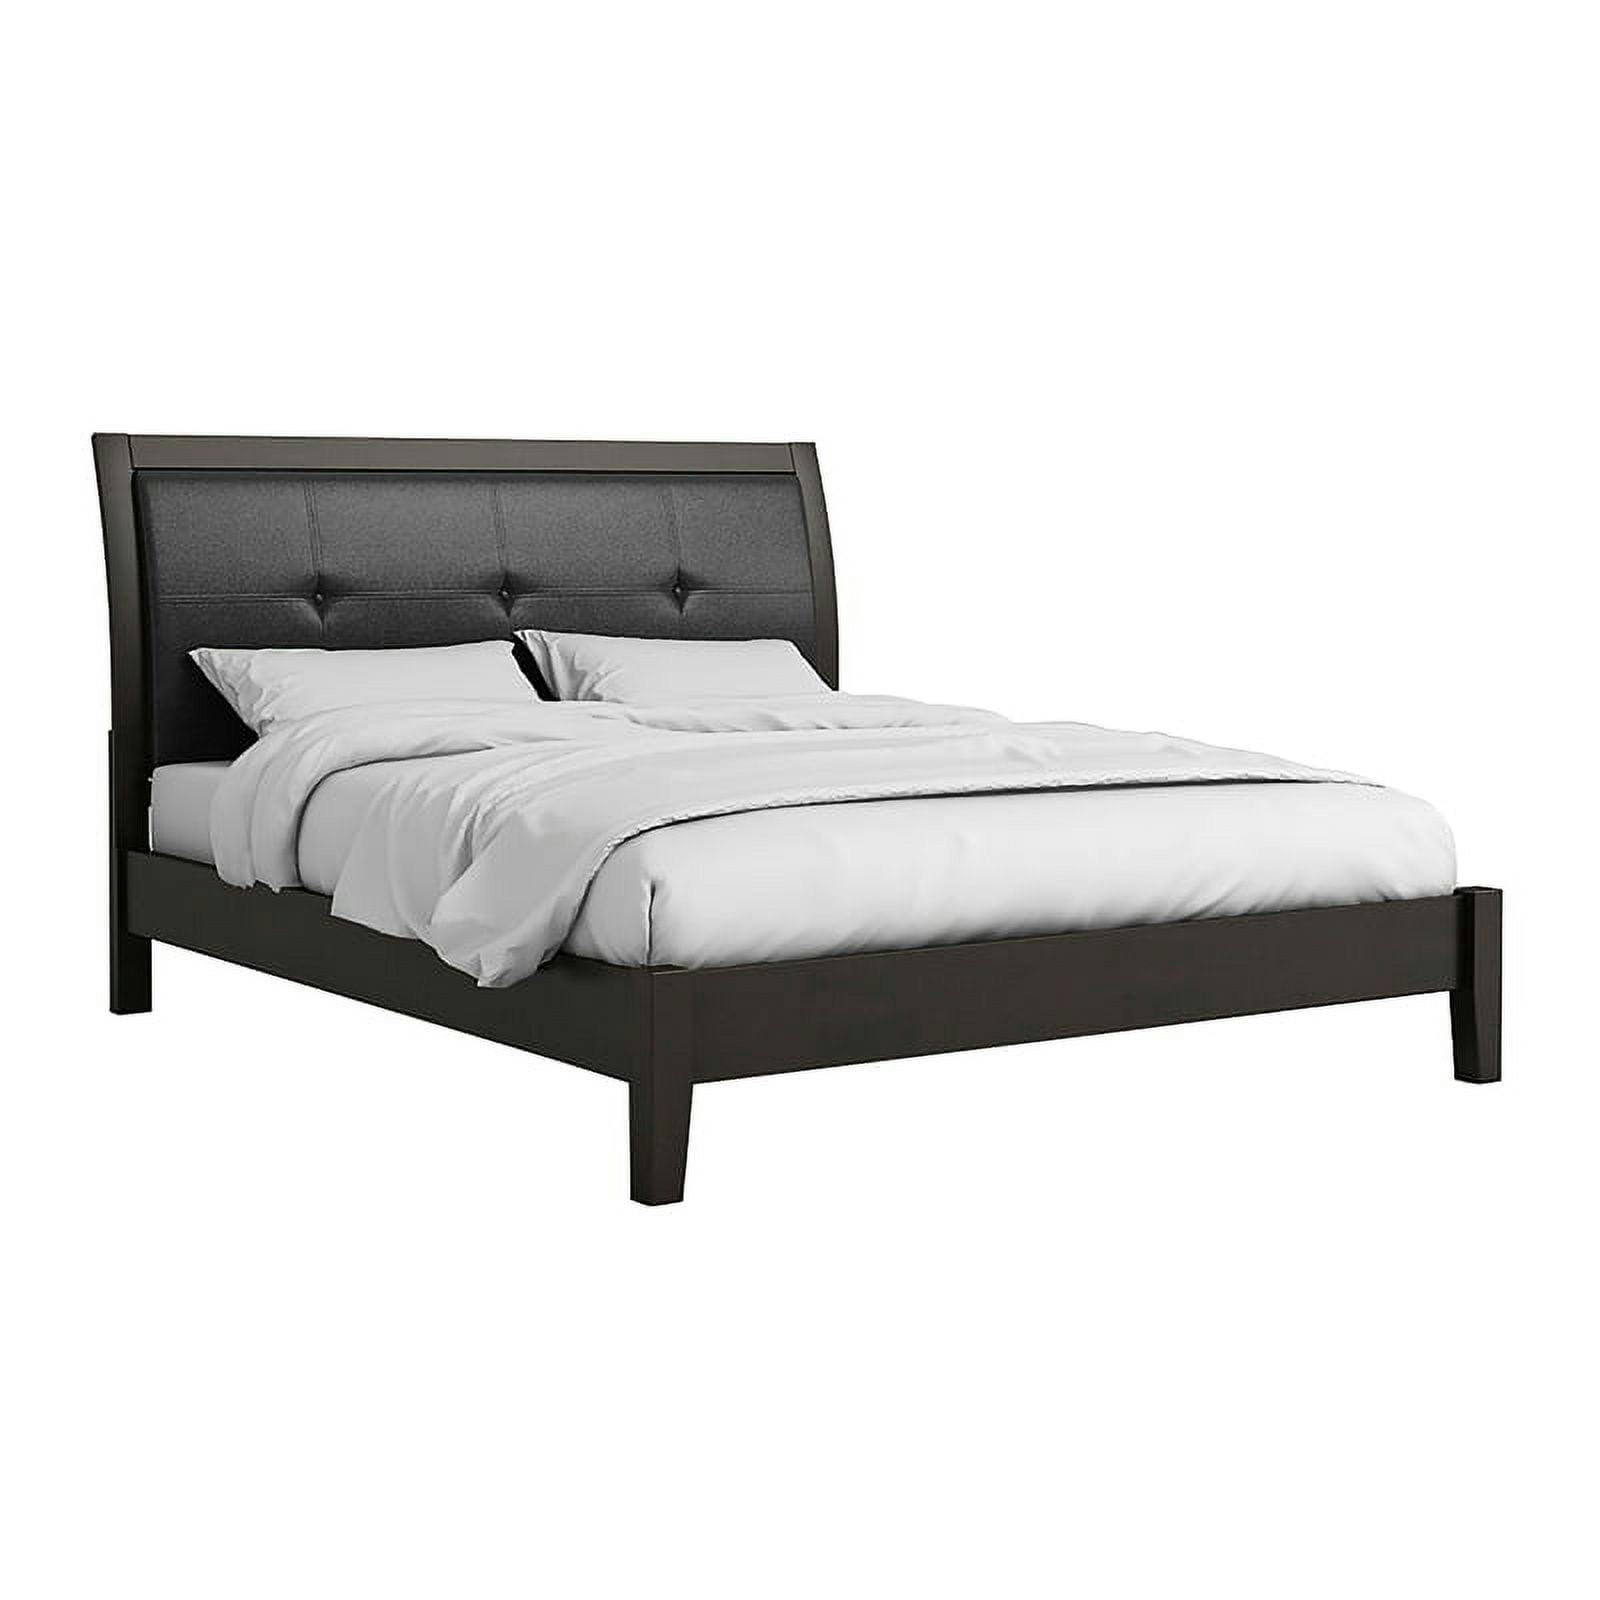 Espresso Faux Leather King Platform Bed with Tufted Headboard